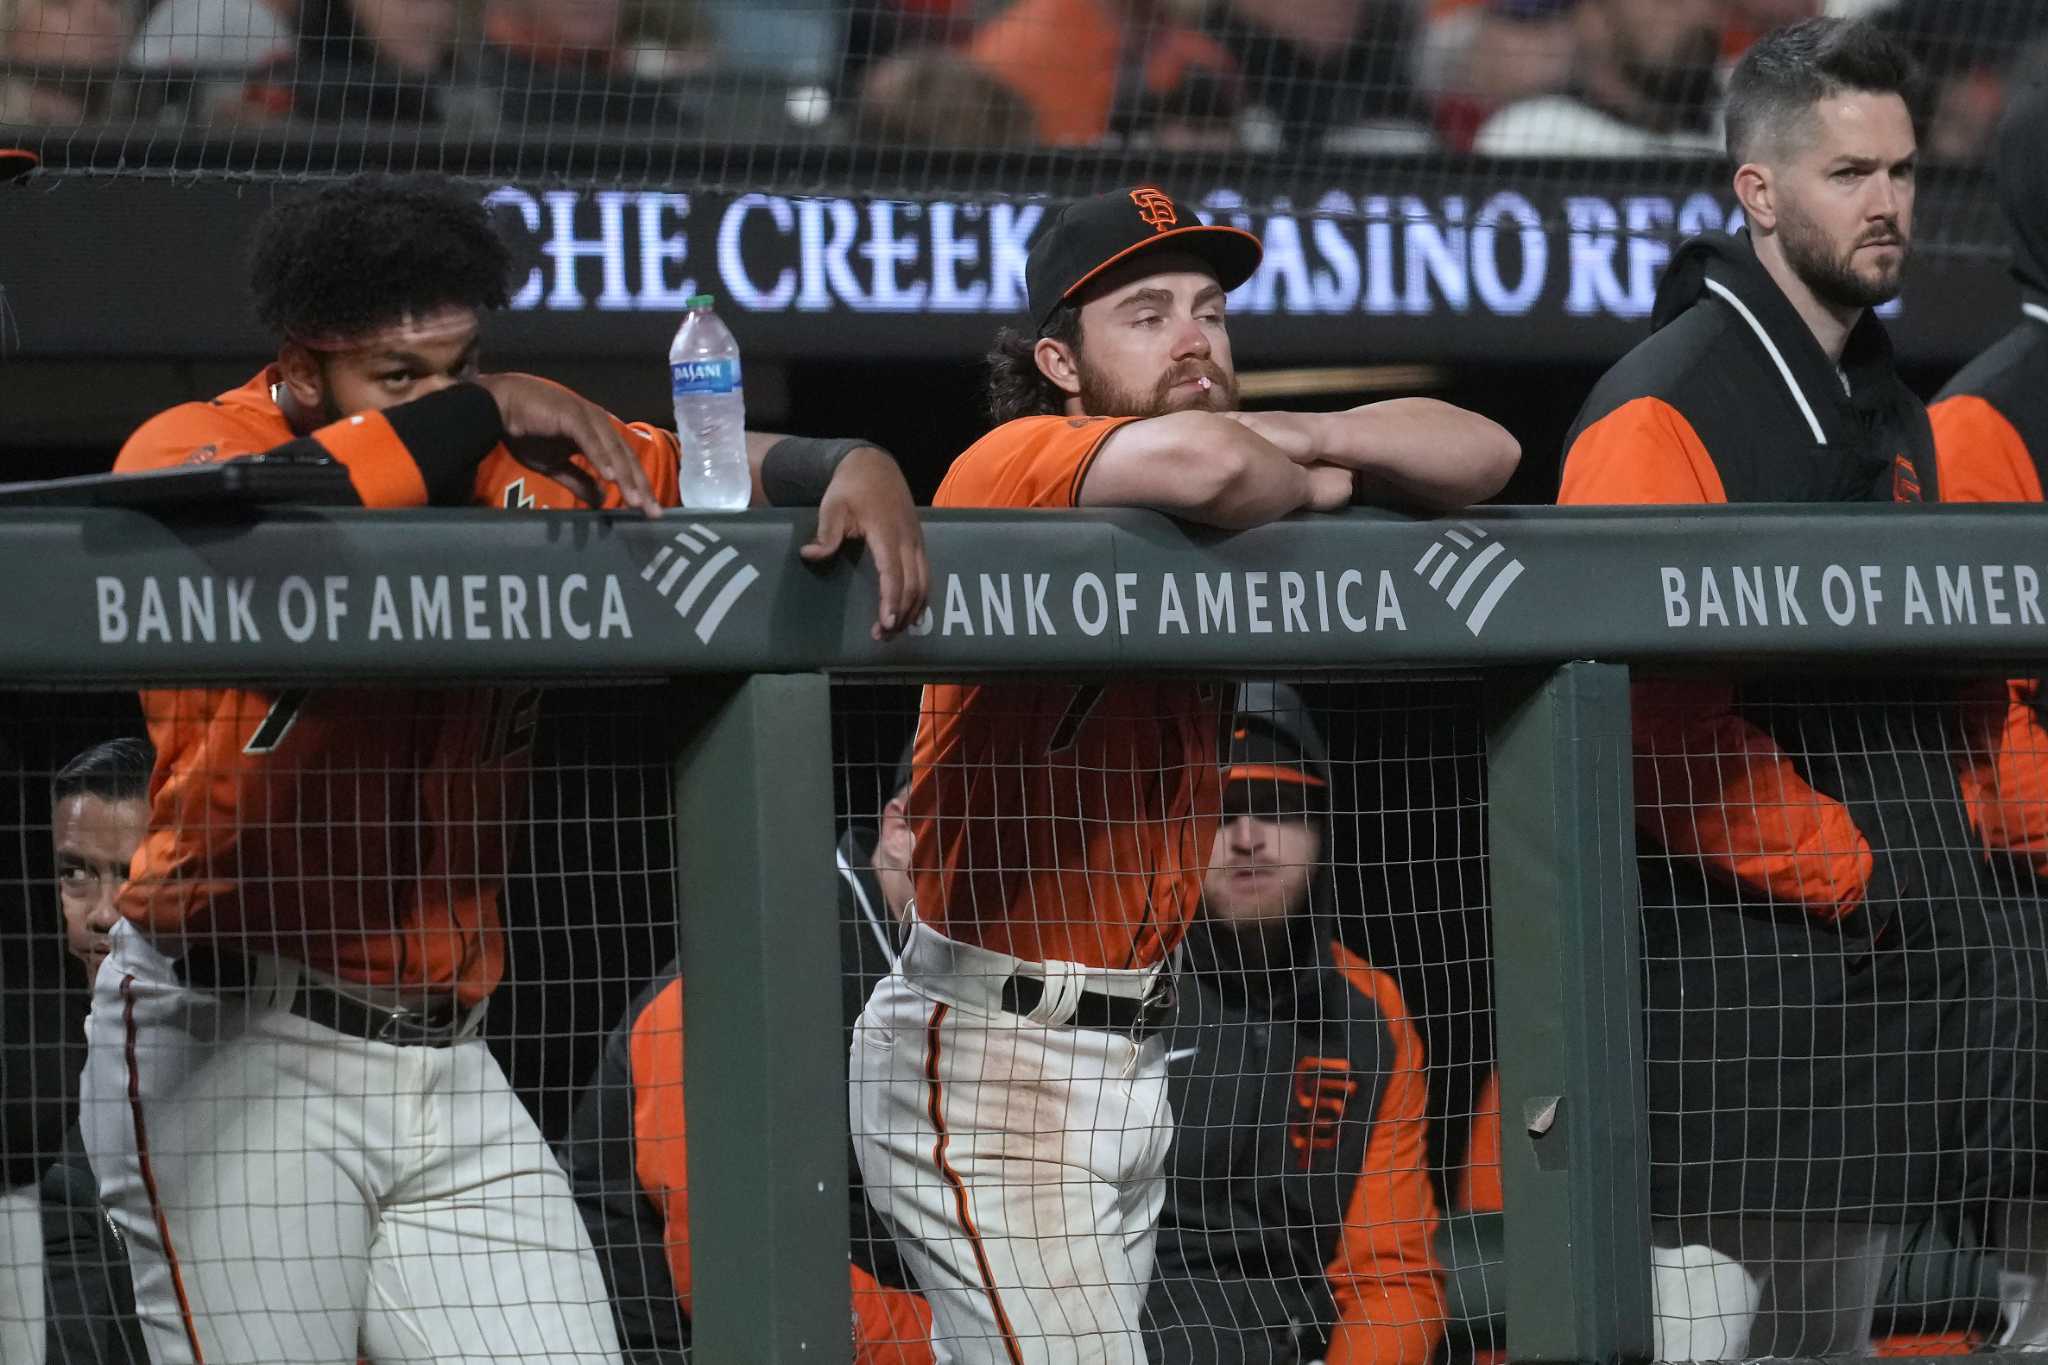 Giants lose again to Mets, continue to dig early season hole